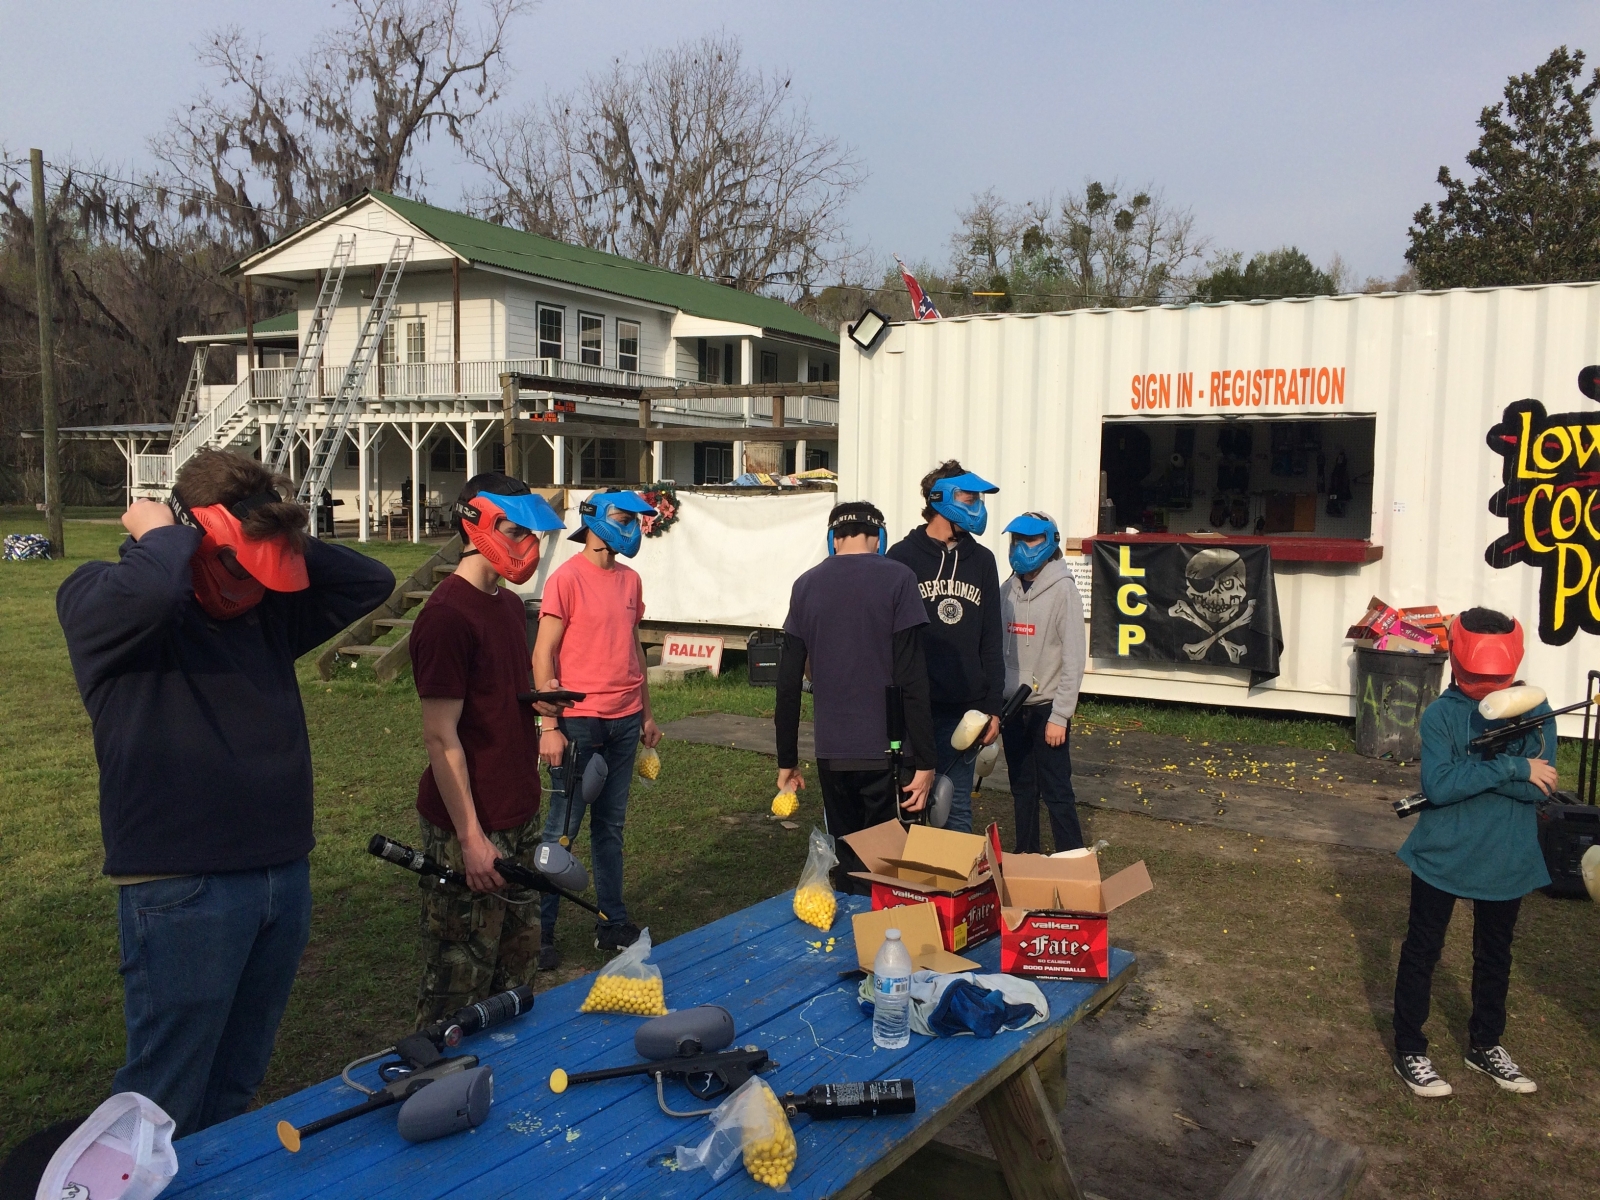 Michael Baer - Student Ministry Paintball Outing